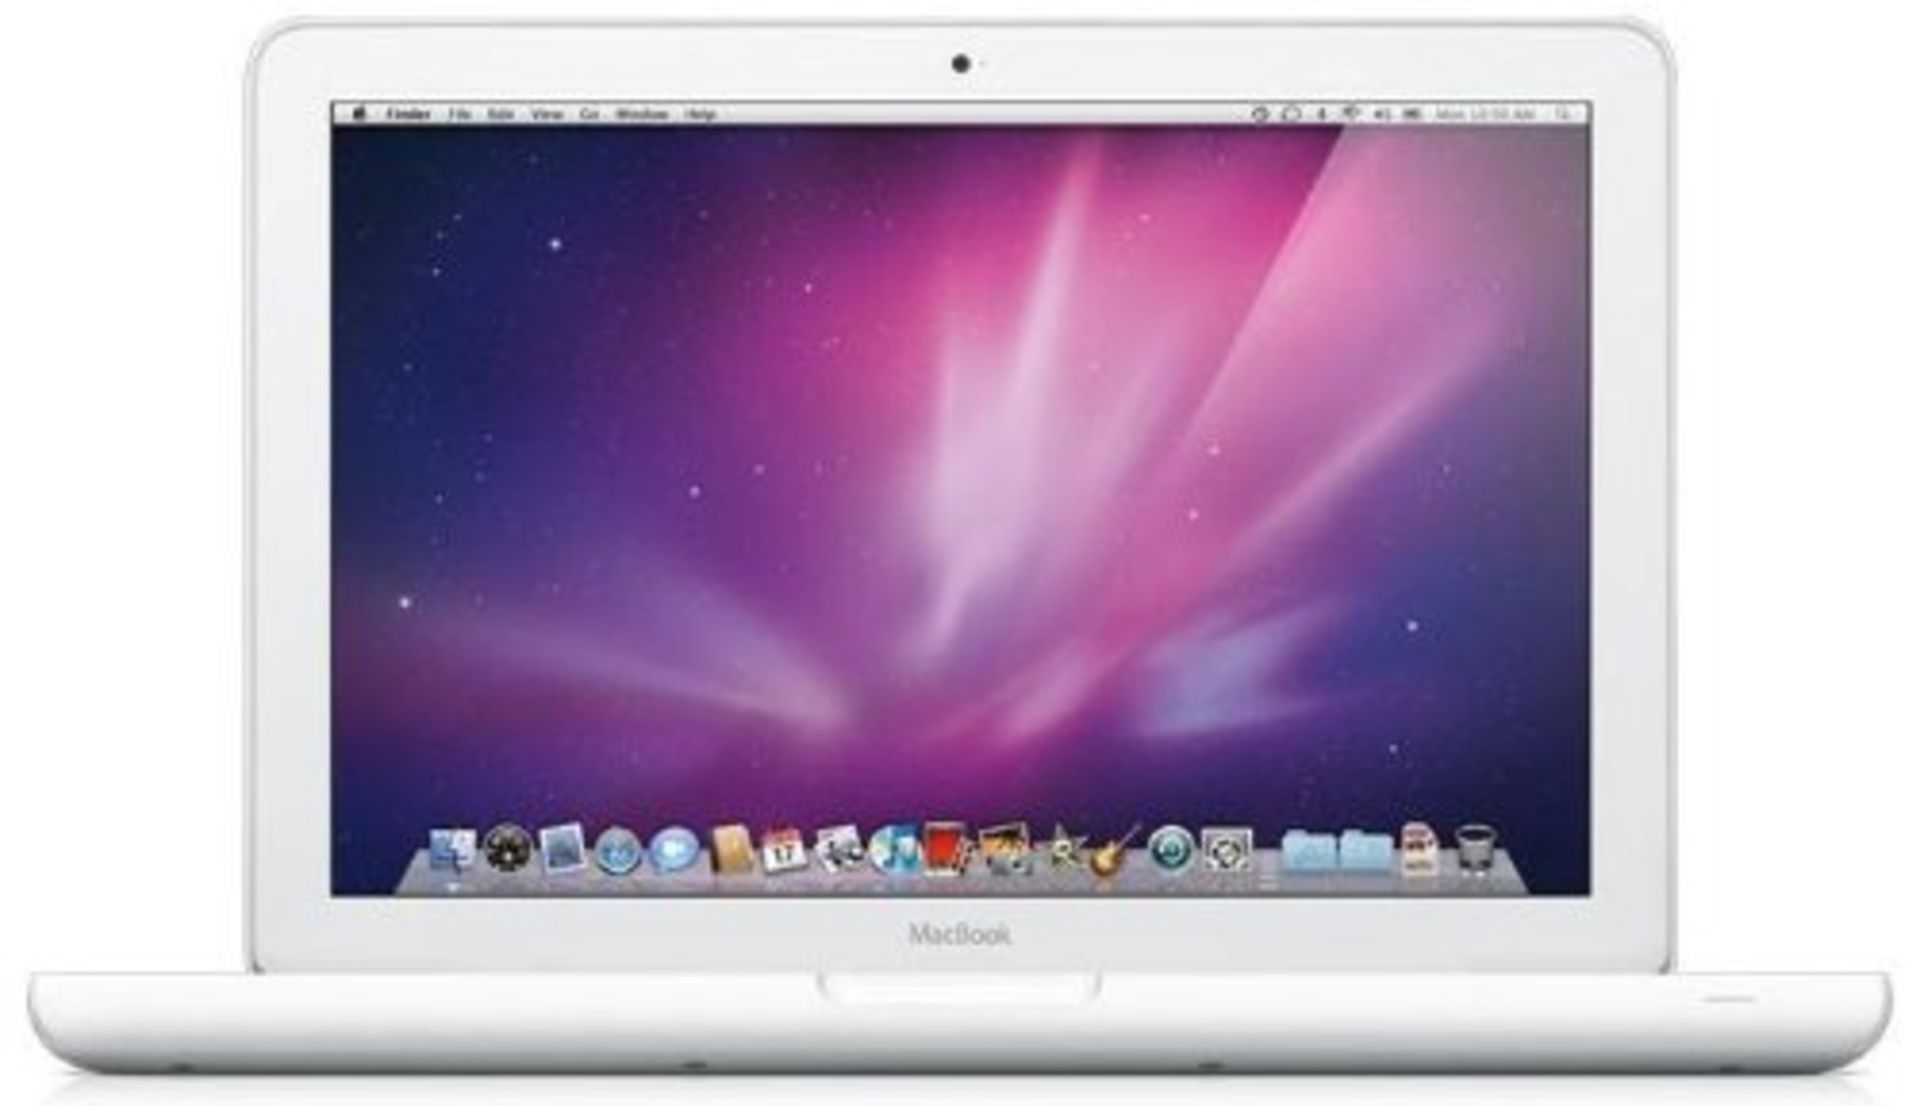 V Grade B Apple Macbook 13.3" Laptop - Core 2 Duo - 2.4 GHz - 2GB RAM - 250GB HDD - Includes Power - Image 2 of 3